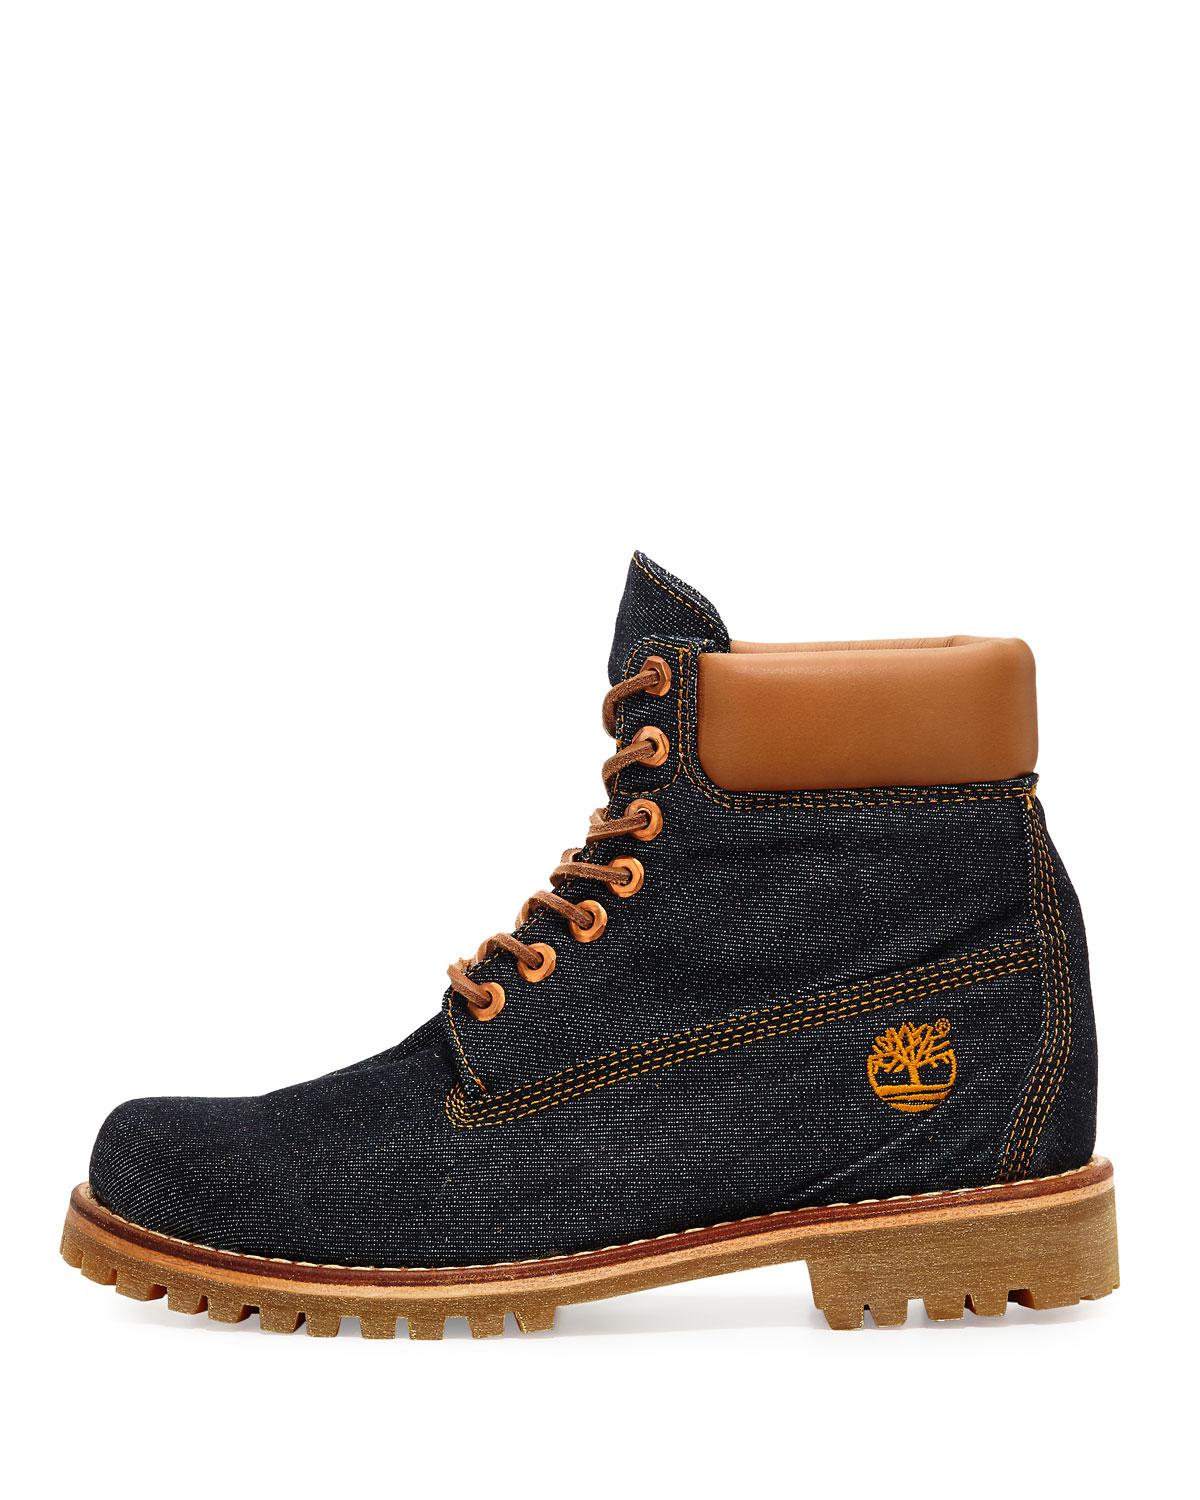 jean timberland boots